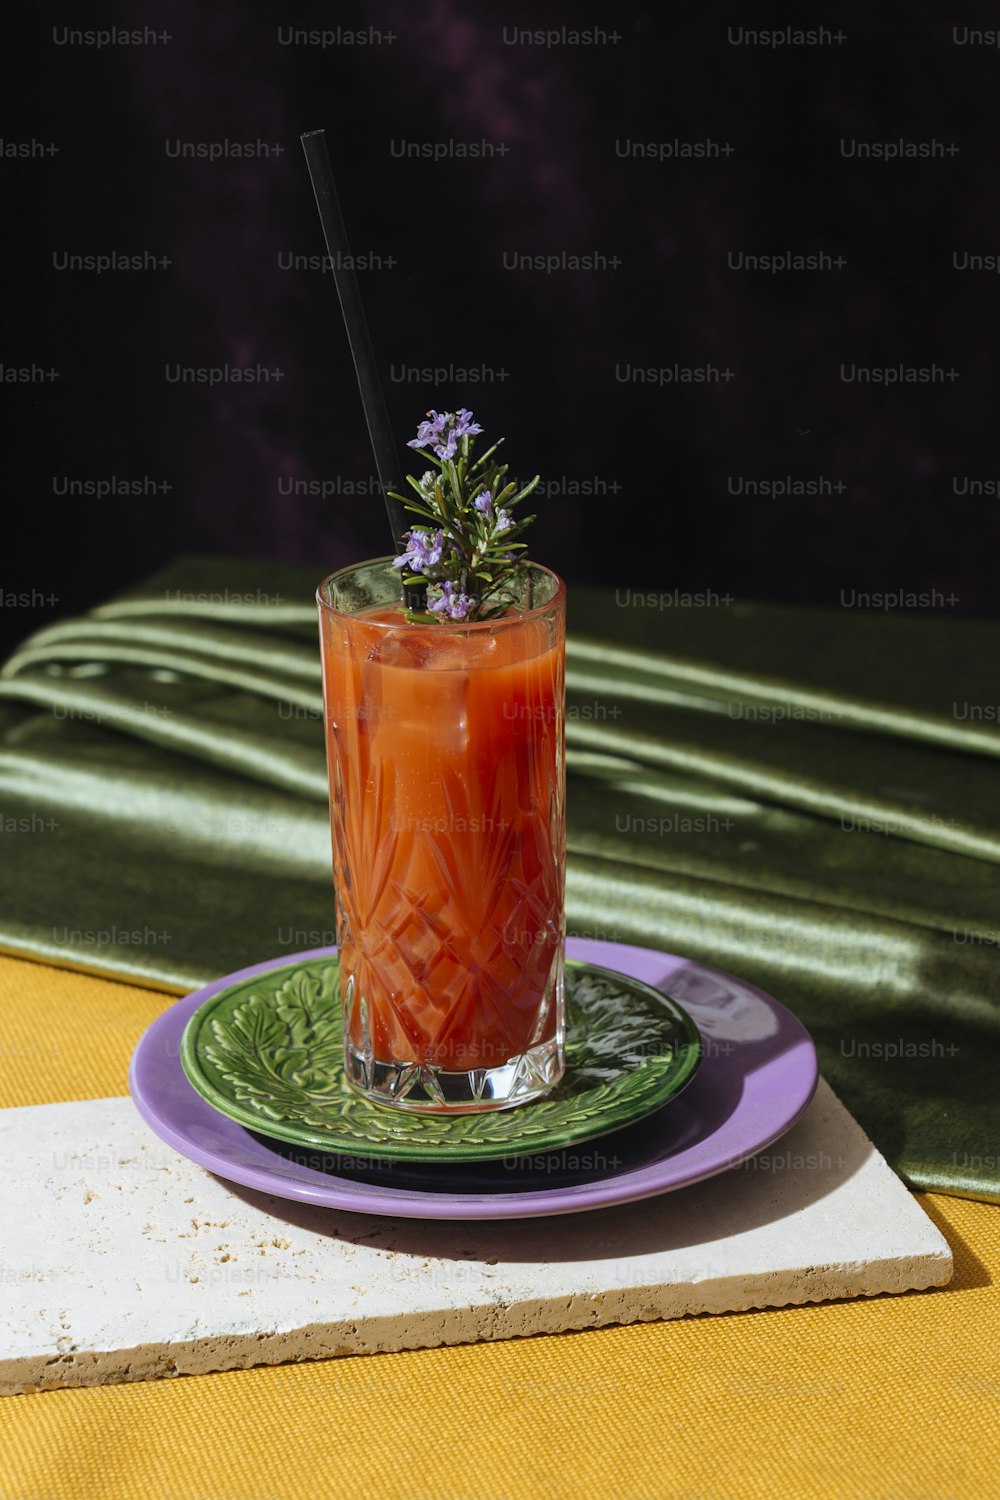 Bloody Mary is a cocktail containing vodka, tomato juice, and combinations of other spices and flavorings including Worcestershire sauce, hot sauces, garlic, herbs, and horseradish